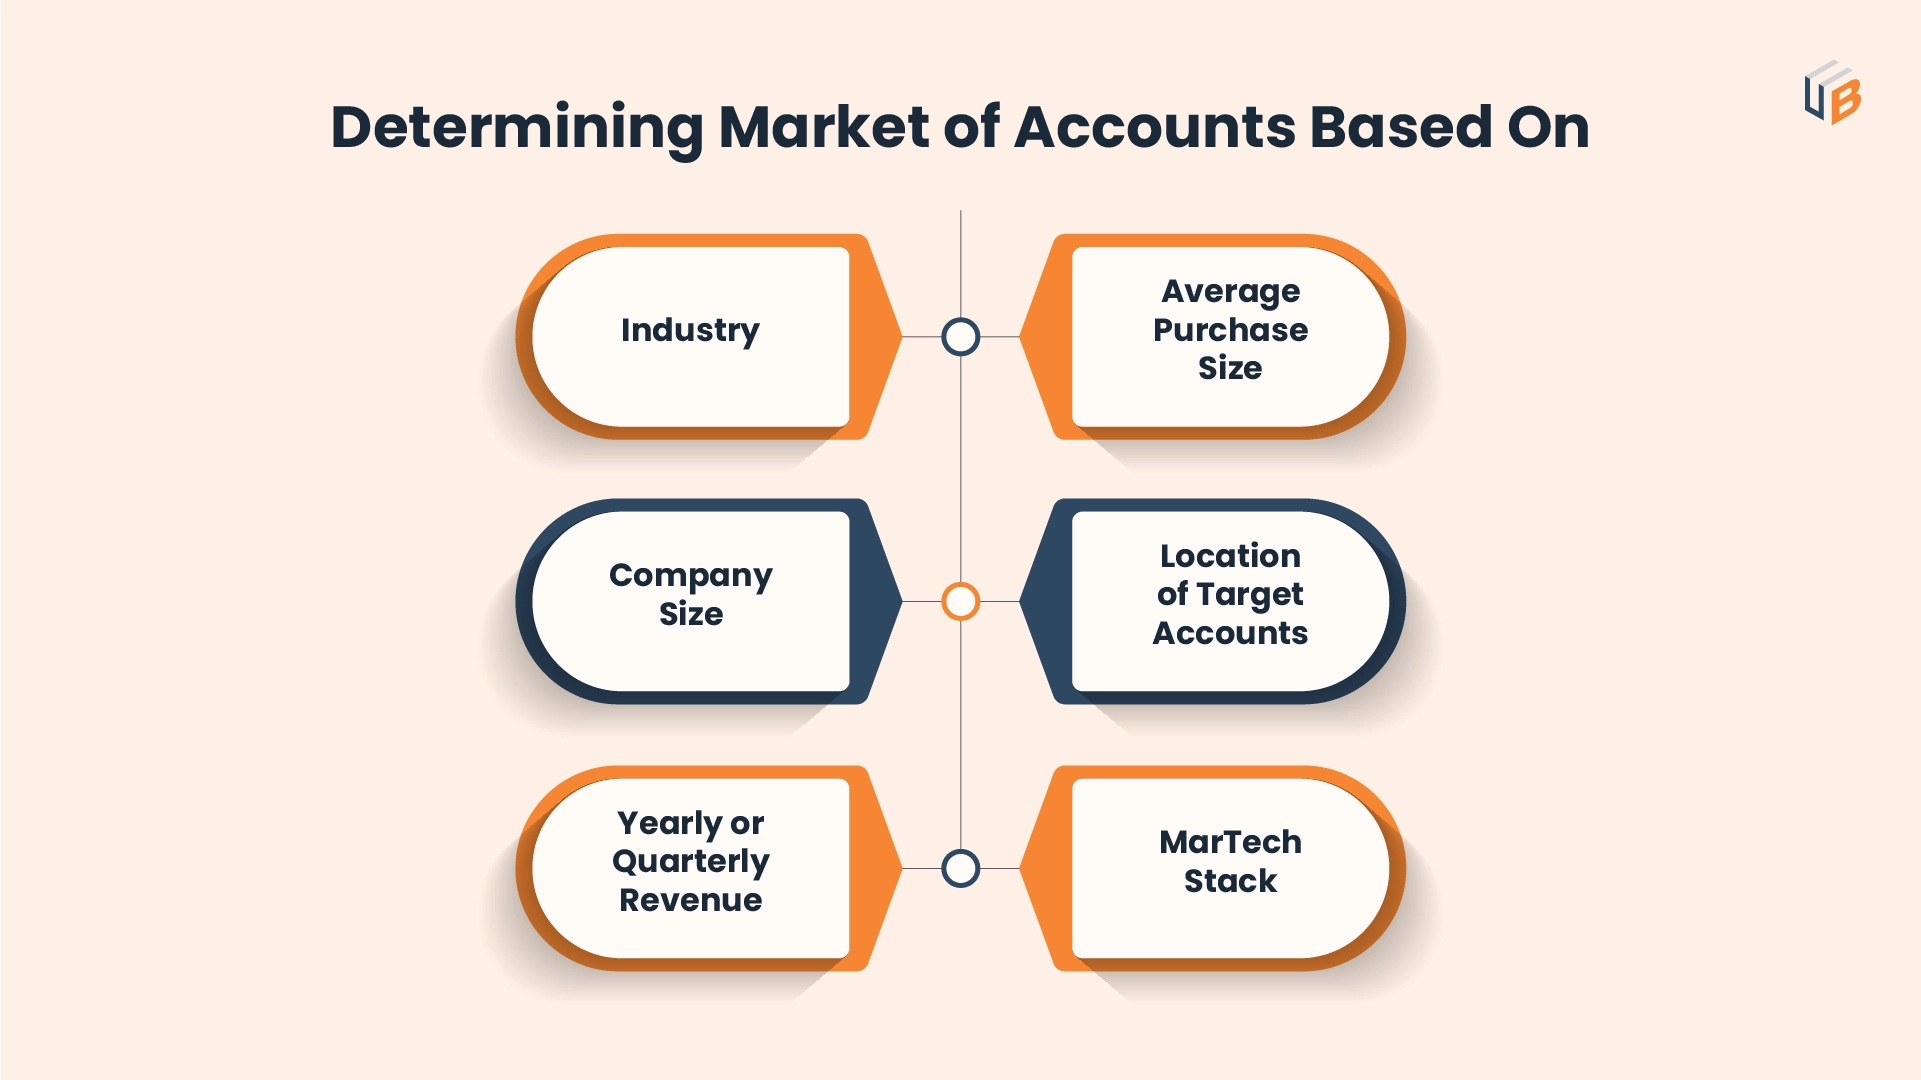 Determining markets of Accounts Based on